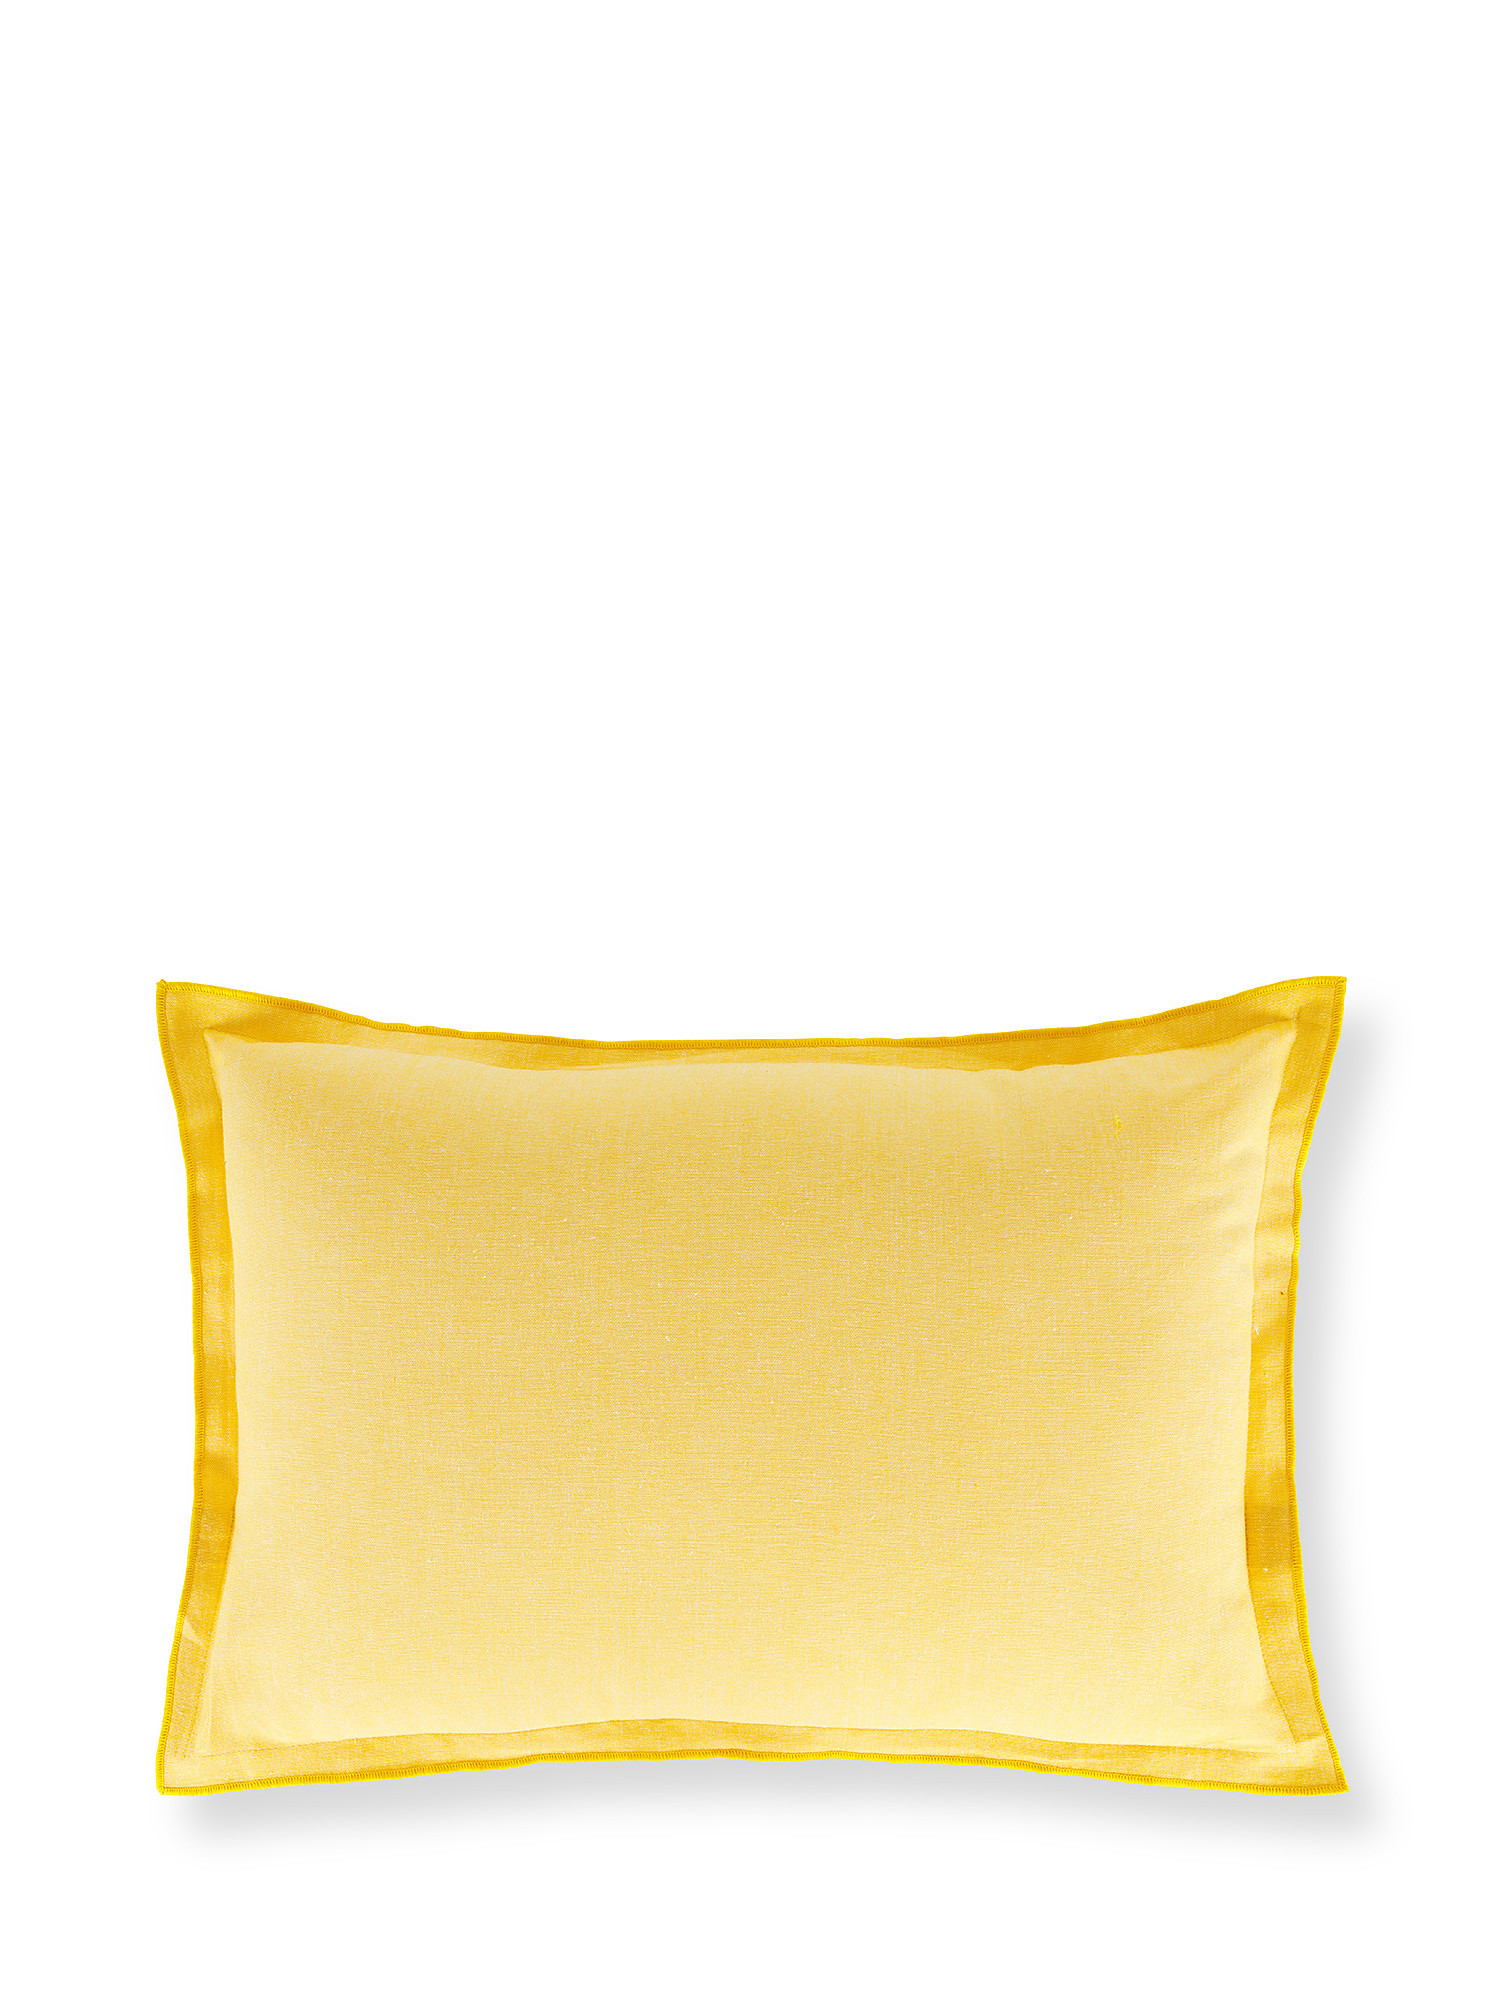 Solid color cotton cushion 45x45cm, Yellow, large image number 0